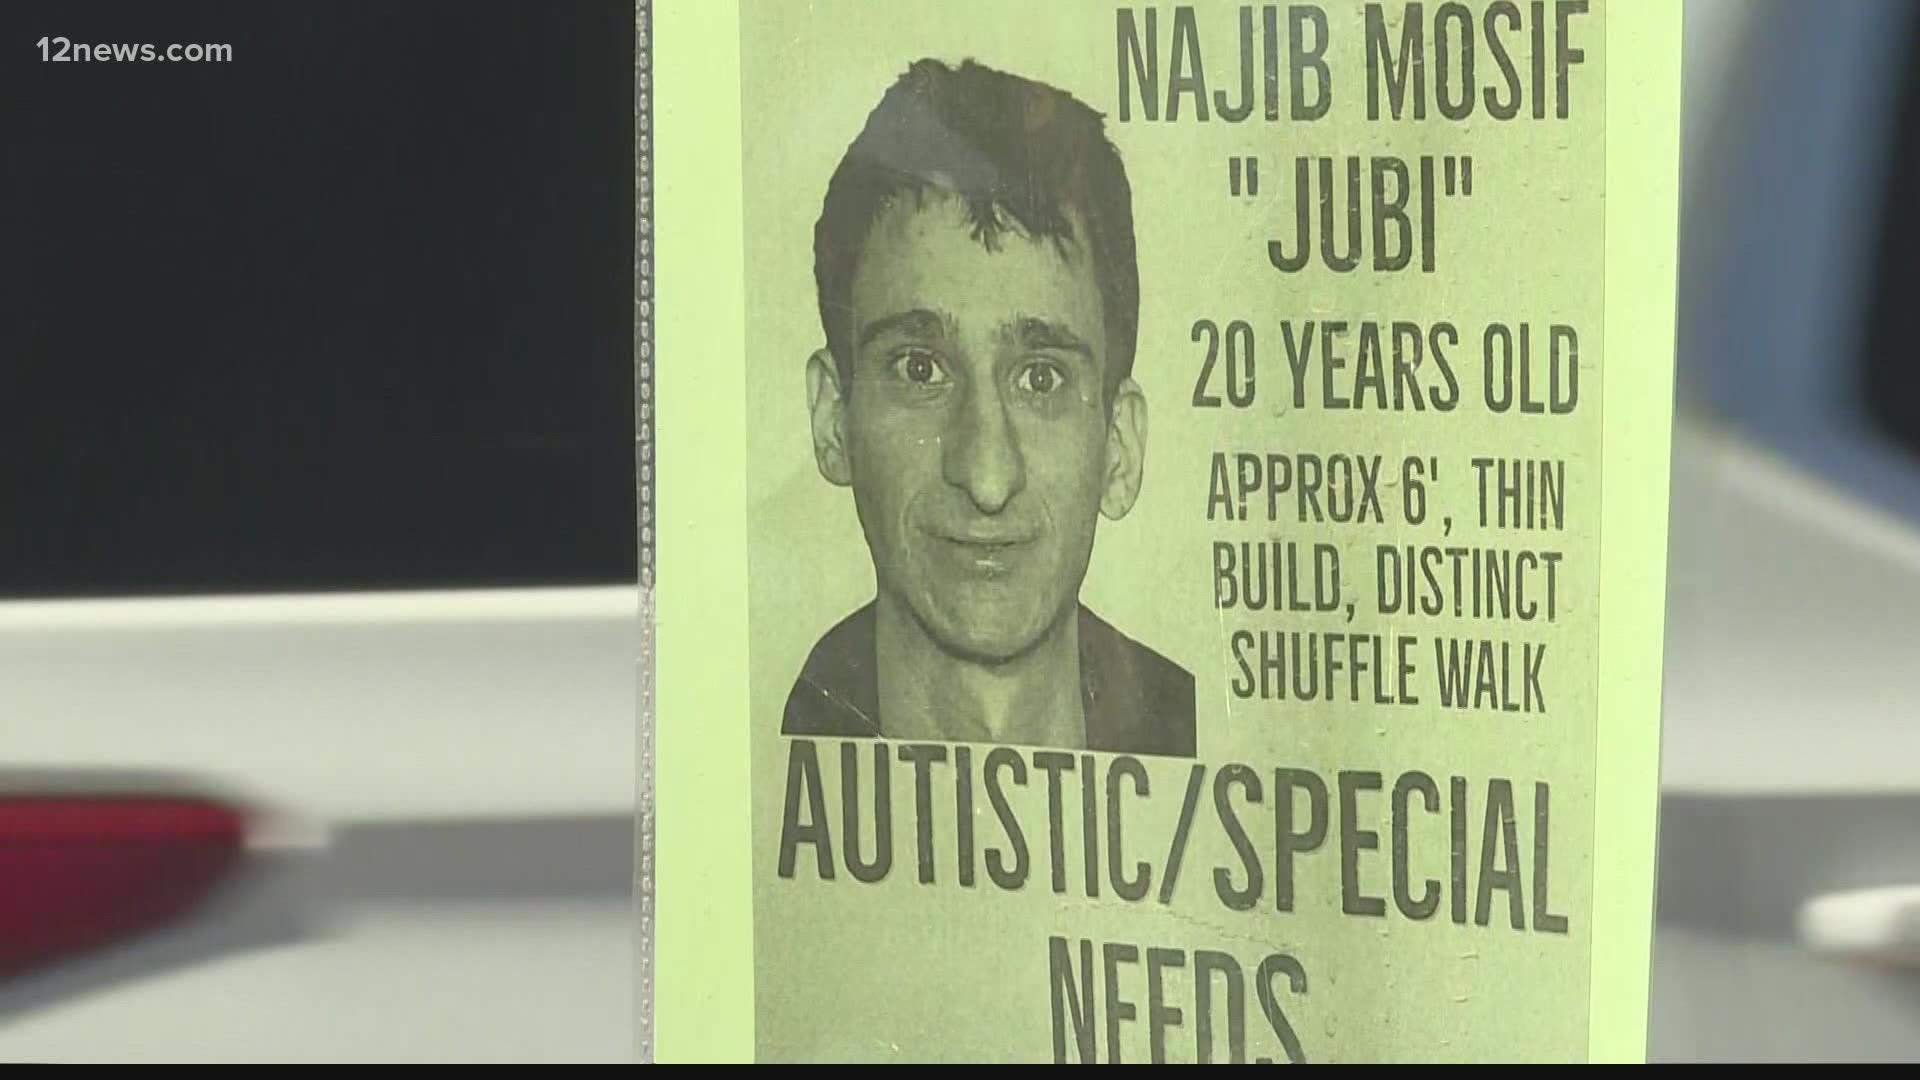 The family of Najib Monsif, better known as Jubi, is offering a $100,000 reward for any information leading to his safe return.